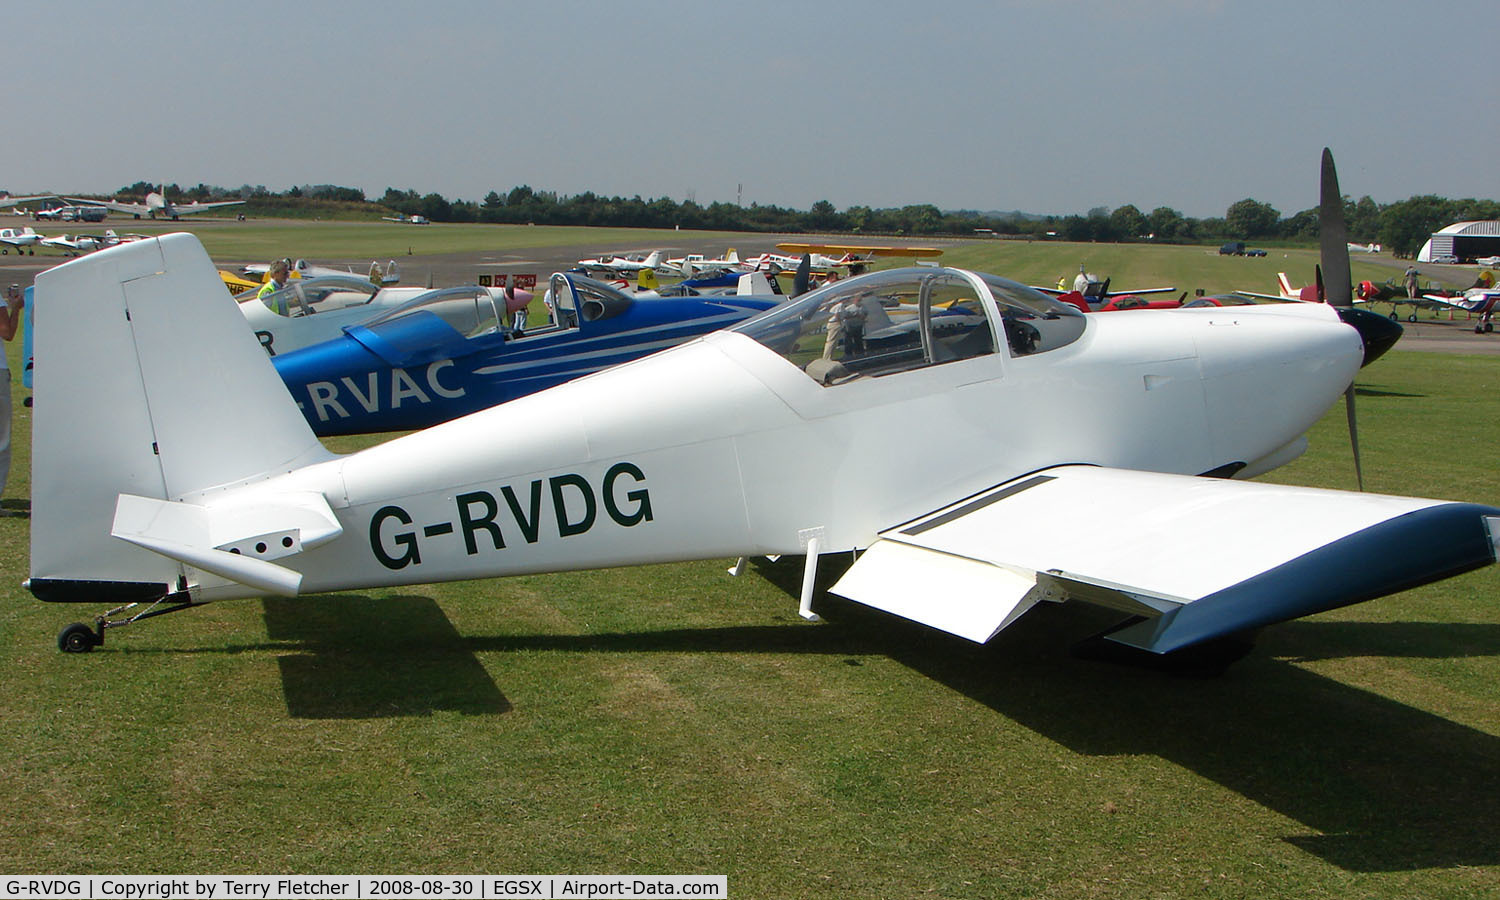 G-RVDG, 2007 Vans RV-9 C/N PFA 320-14310, Participant in the 2008 RV Fly-in at North Weald Uk